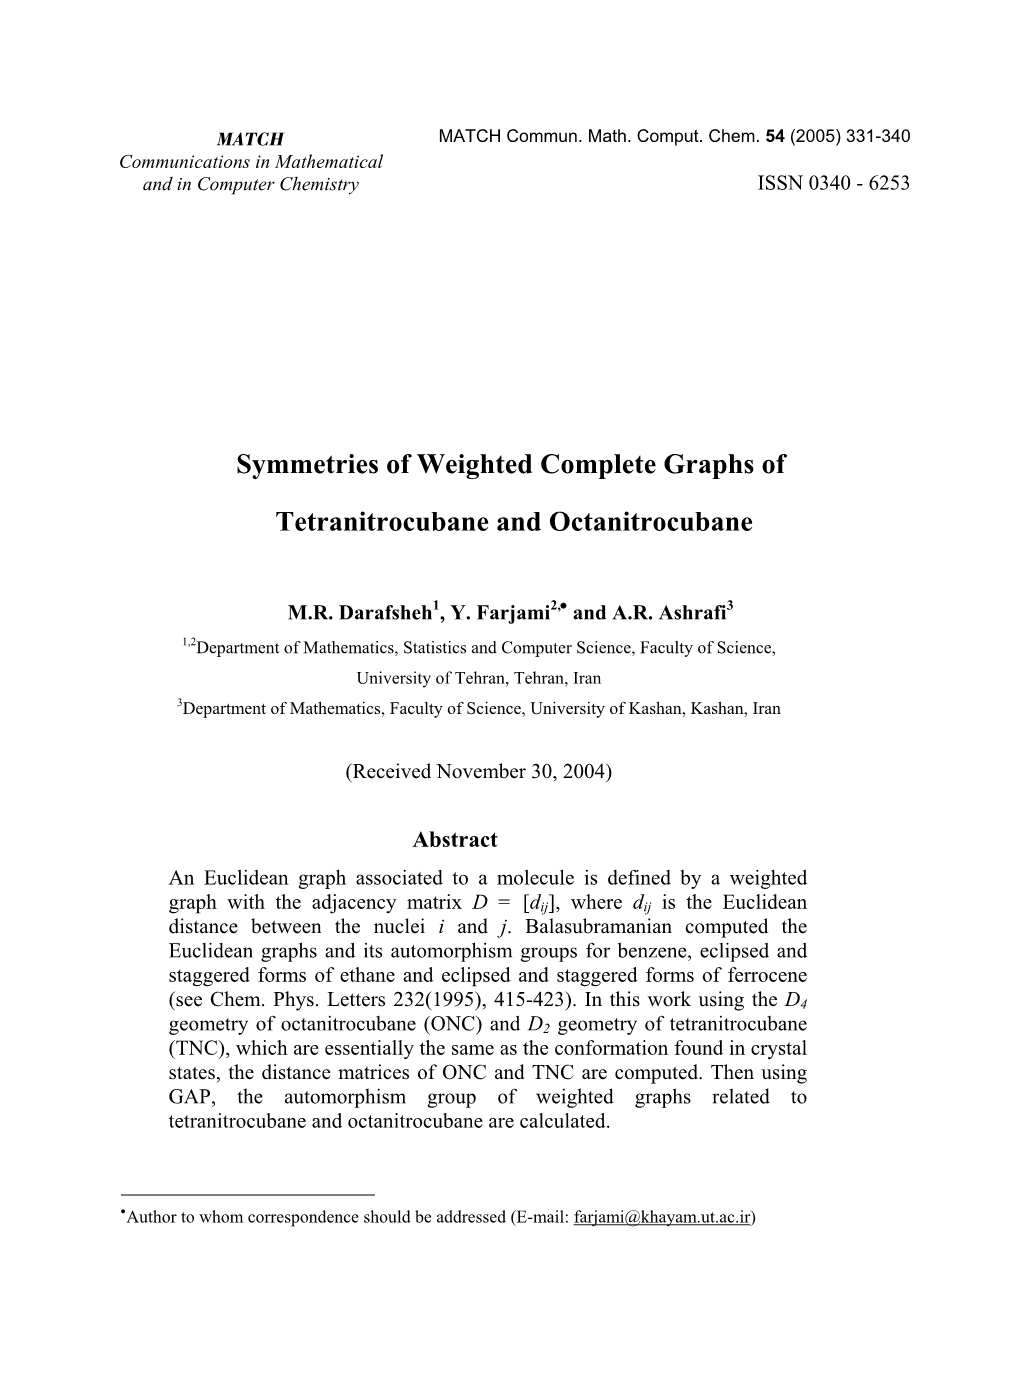 Symmetries of Weighted Complete Graphs of Tetranitrocubane And